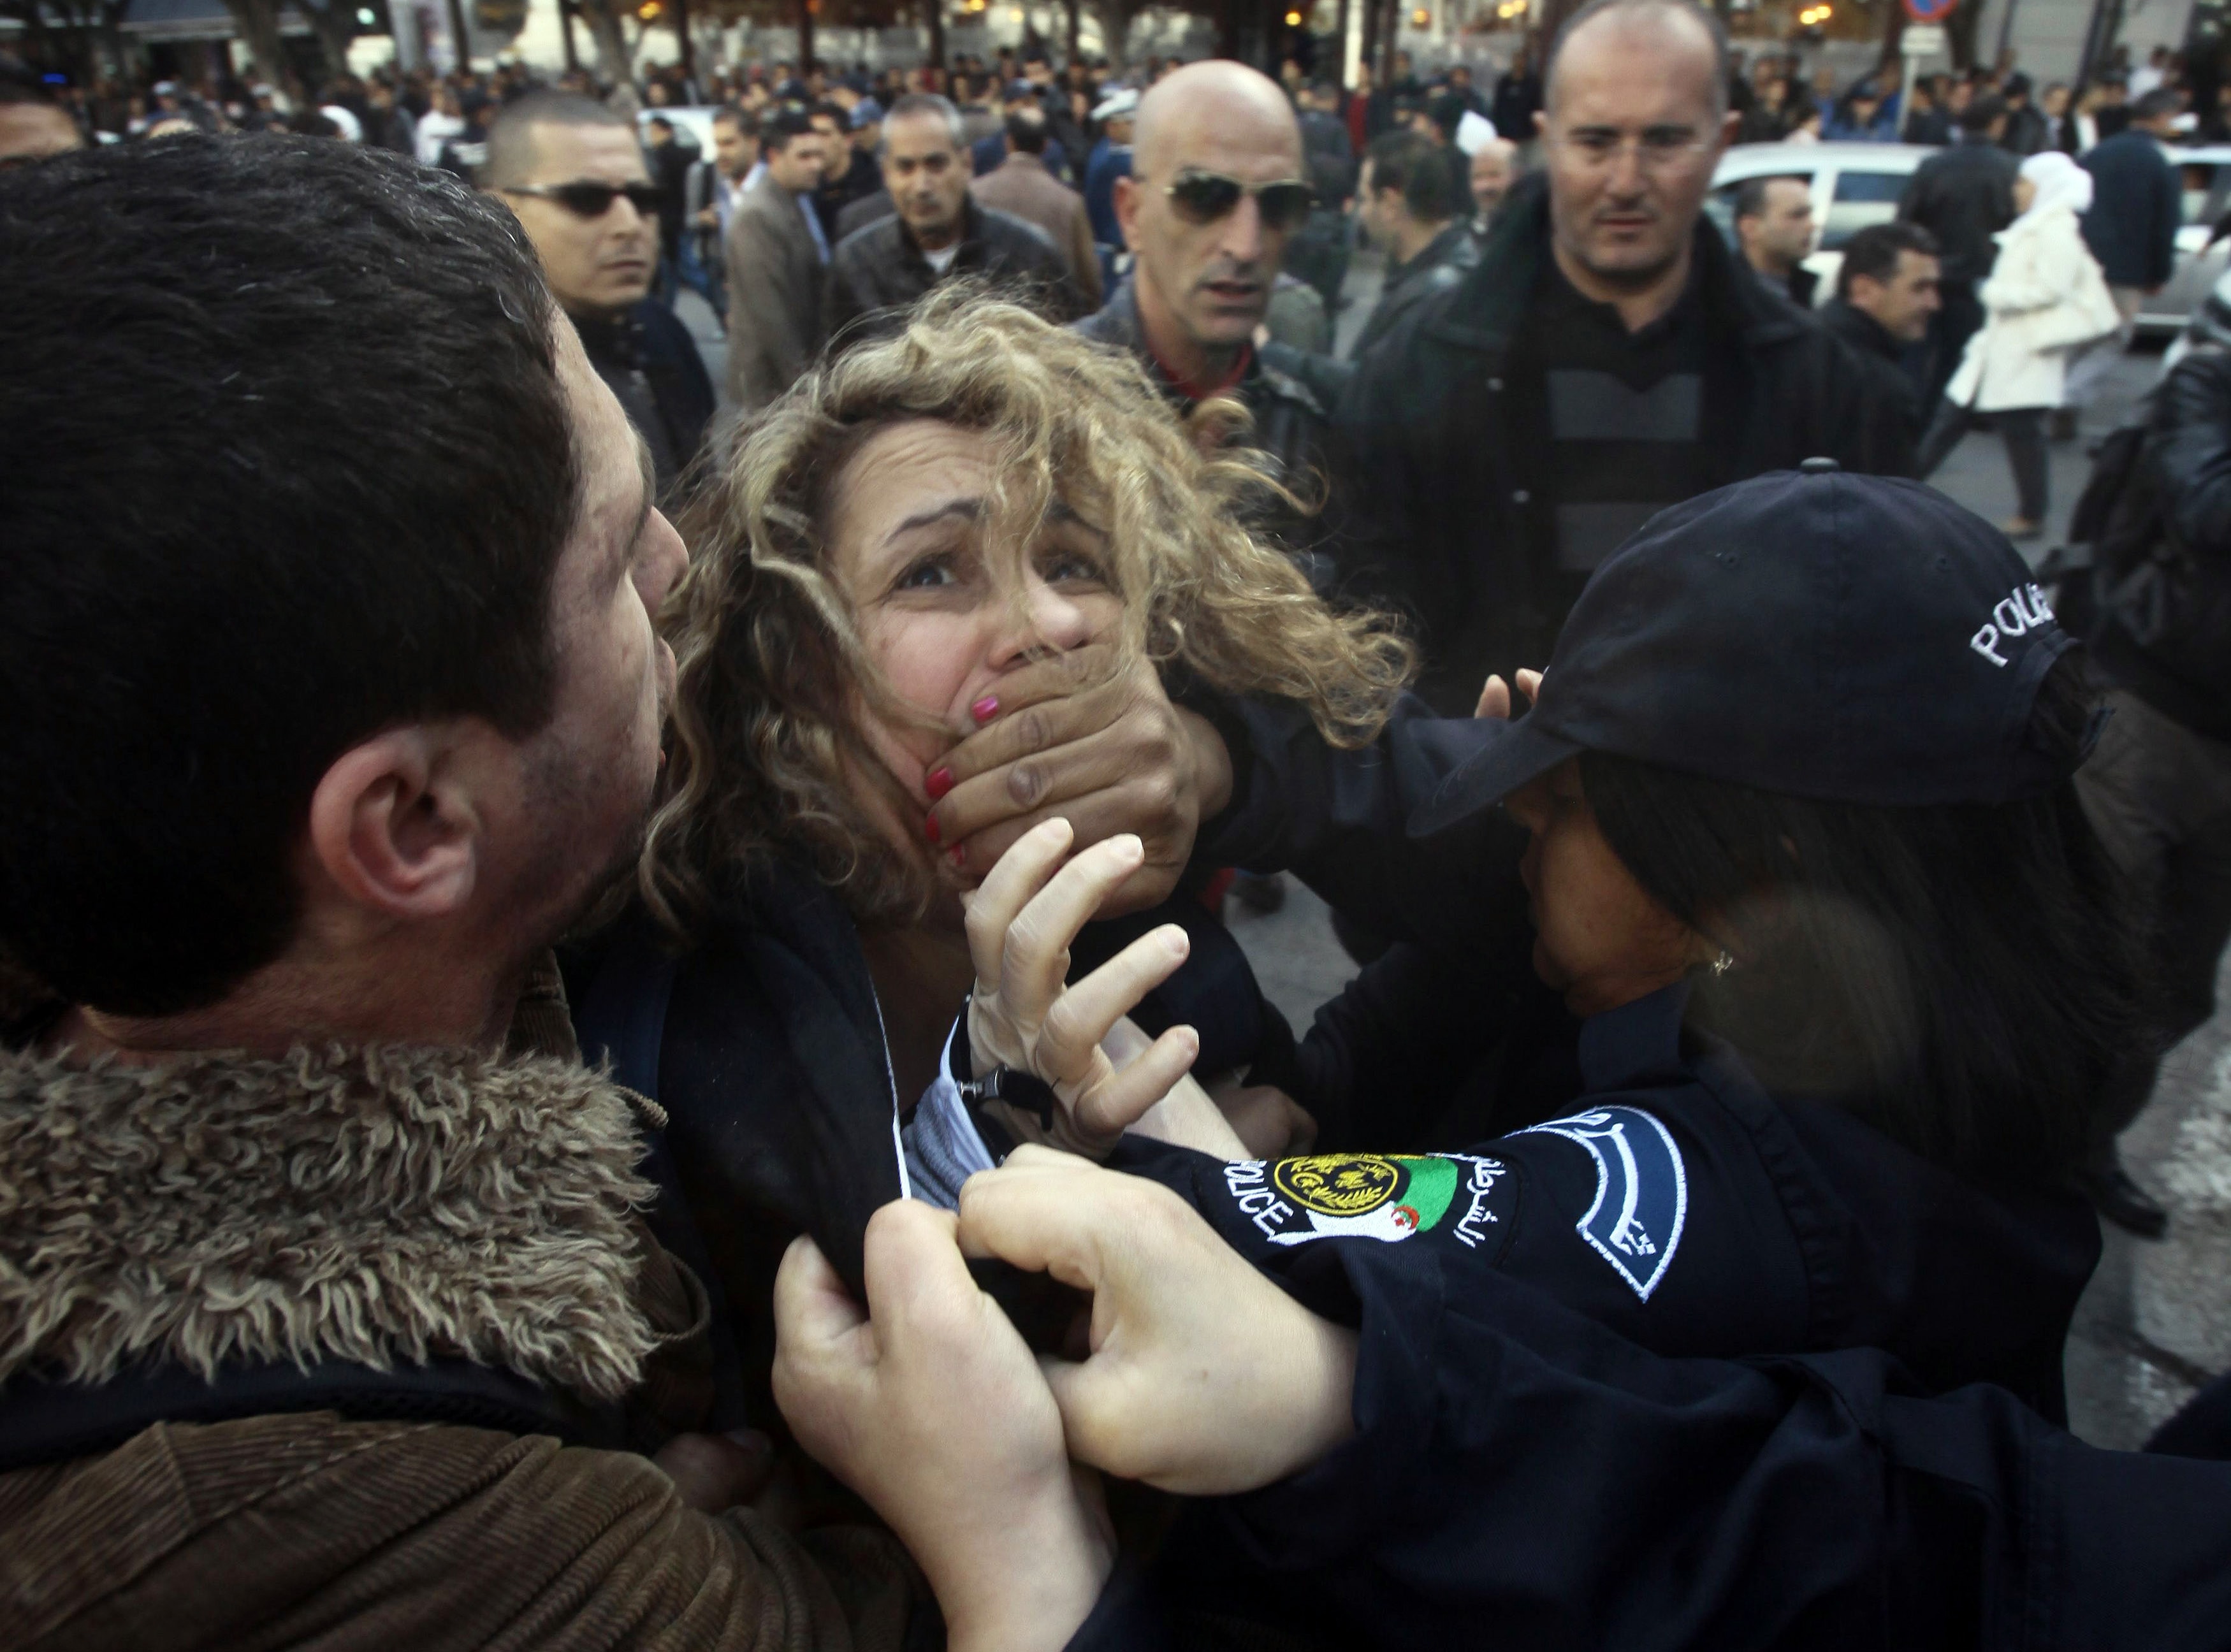 Police detain a protester during a demonstration against Algerian President Abdulaziz Bouteflika's decision to run for a fourth term, in Algiers on 6 March 2014, REUTERS/Ramzi Boudina